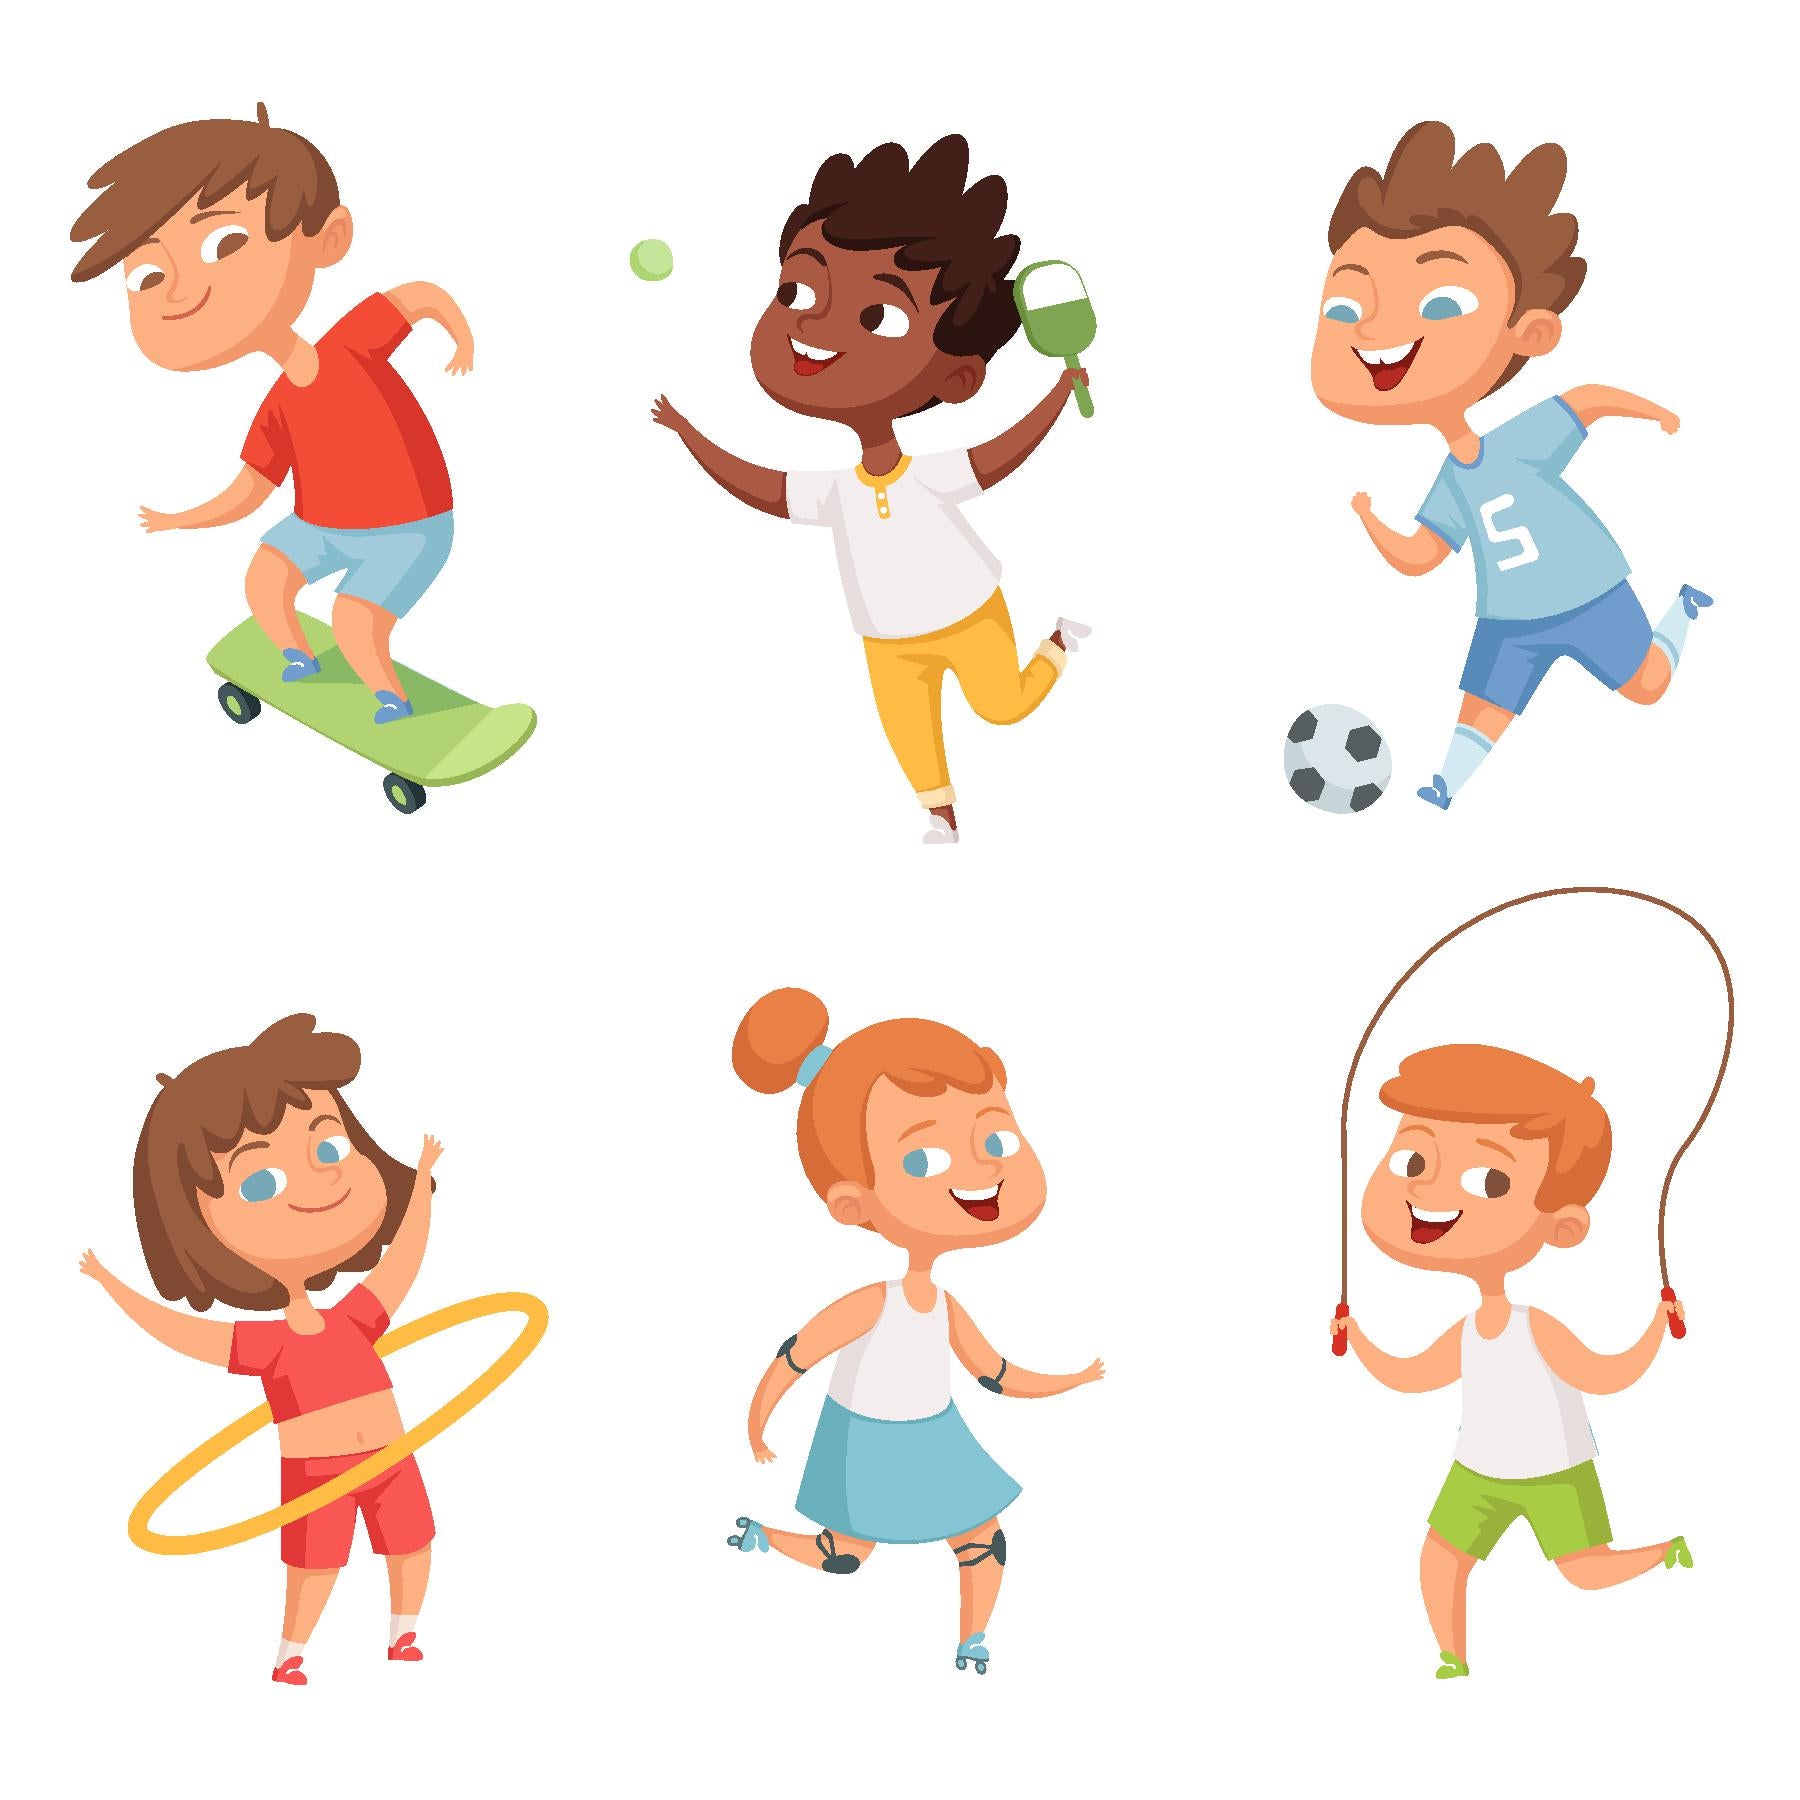 15 Fun Exercises For Kids For A Healthy Body And Mind | Xino Sports